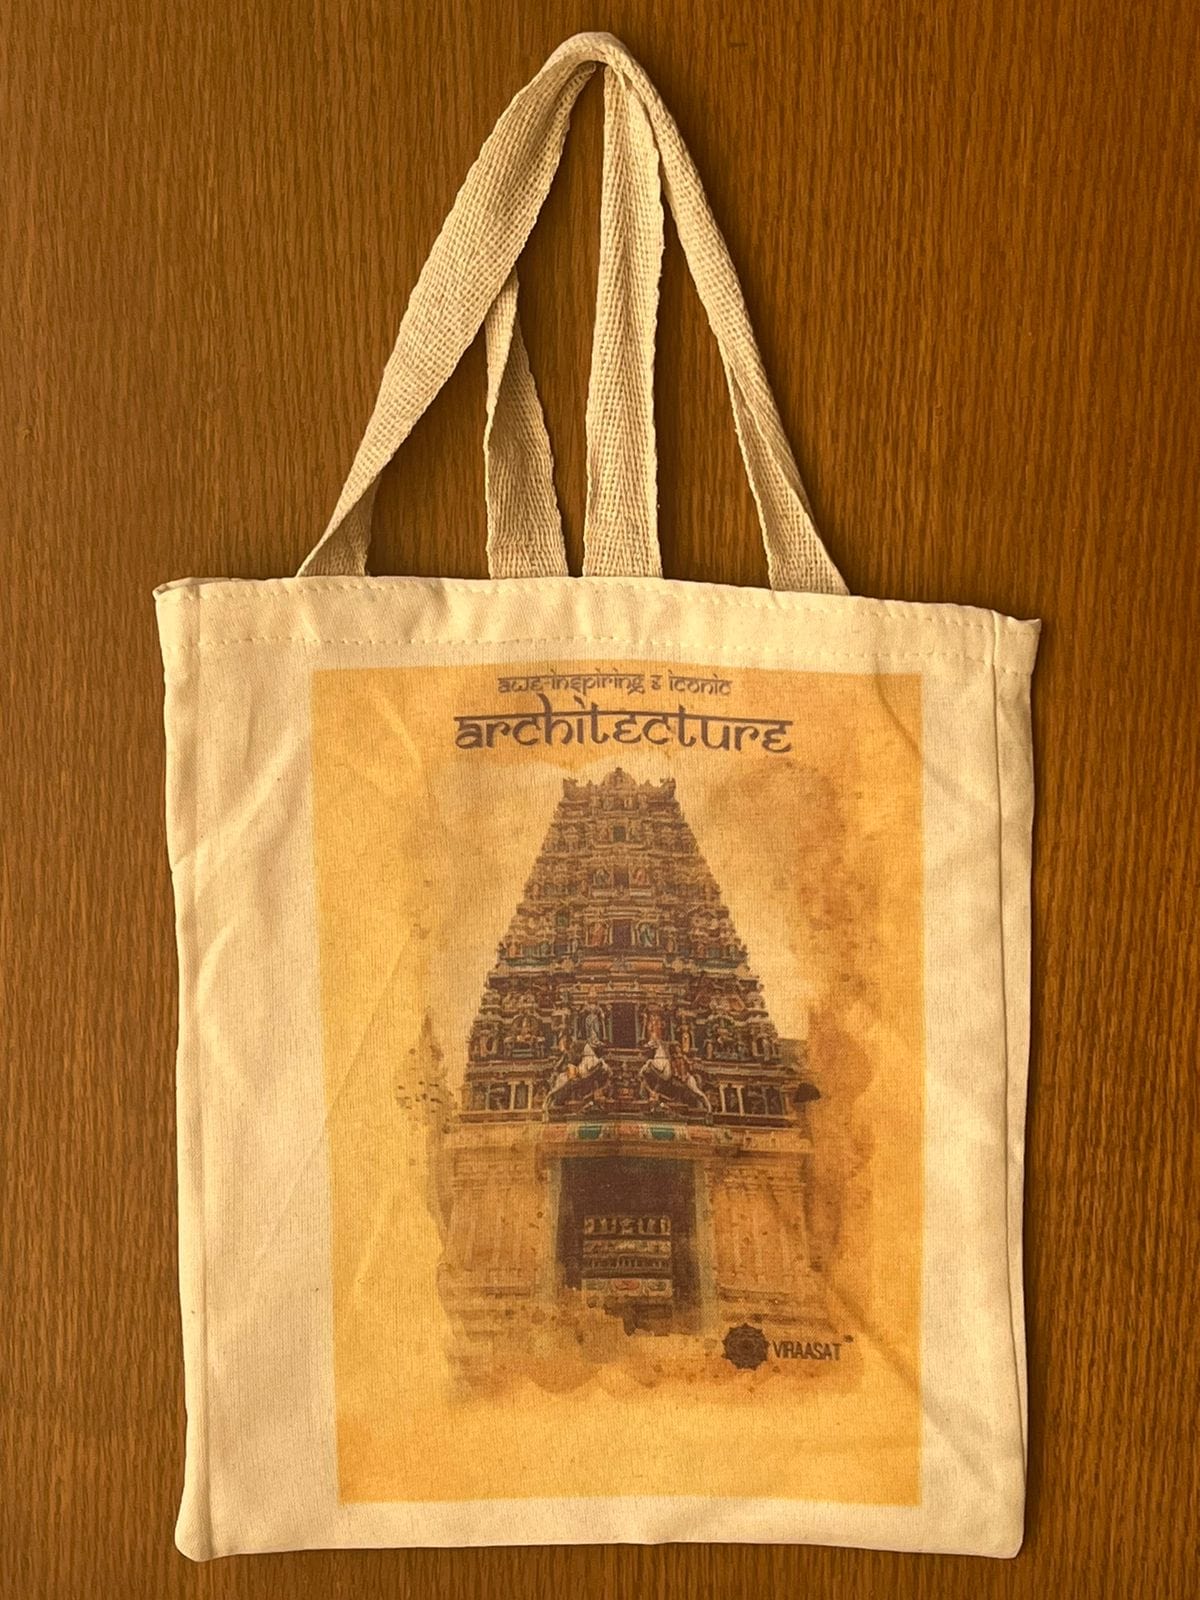 VIRAASAT’S ARCHITECTURE TOTE BAG